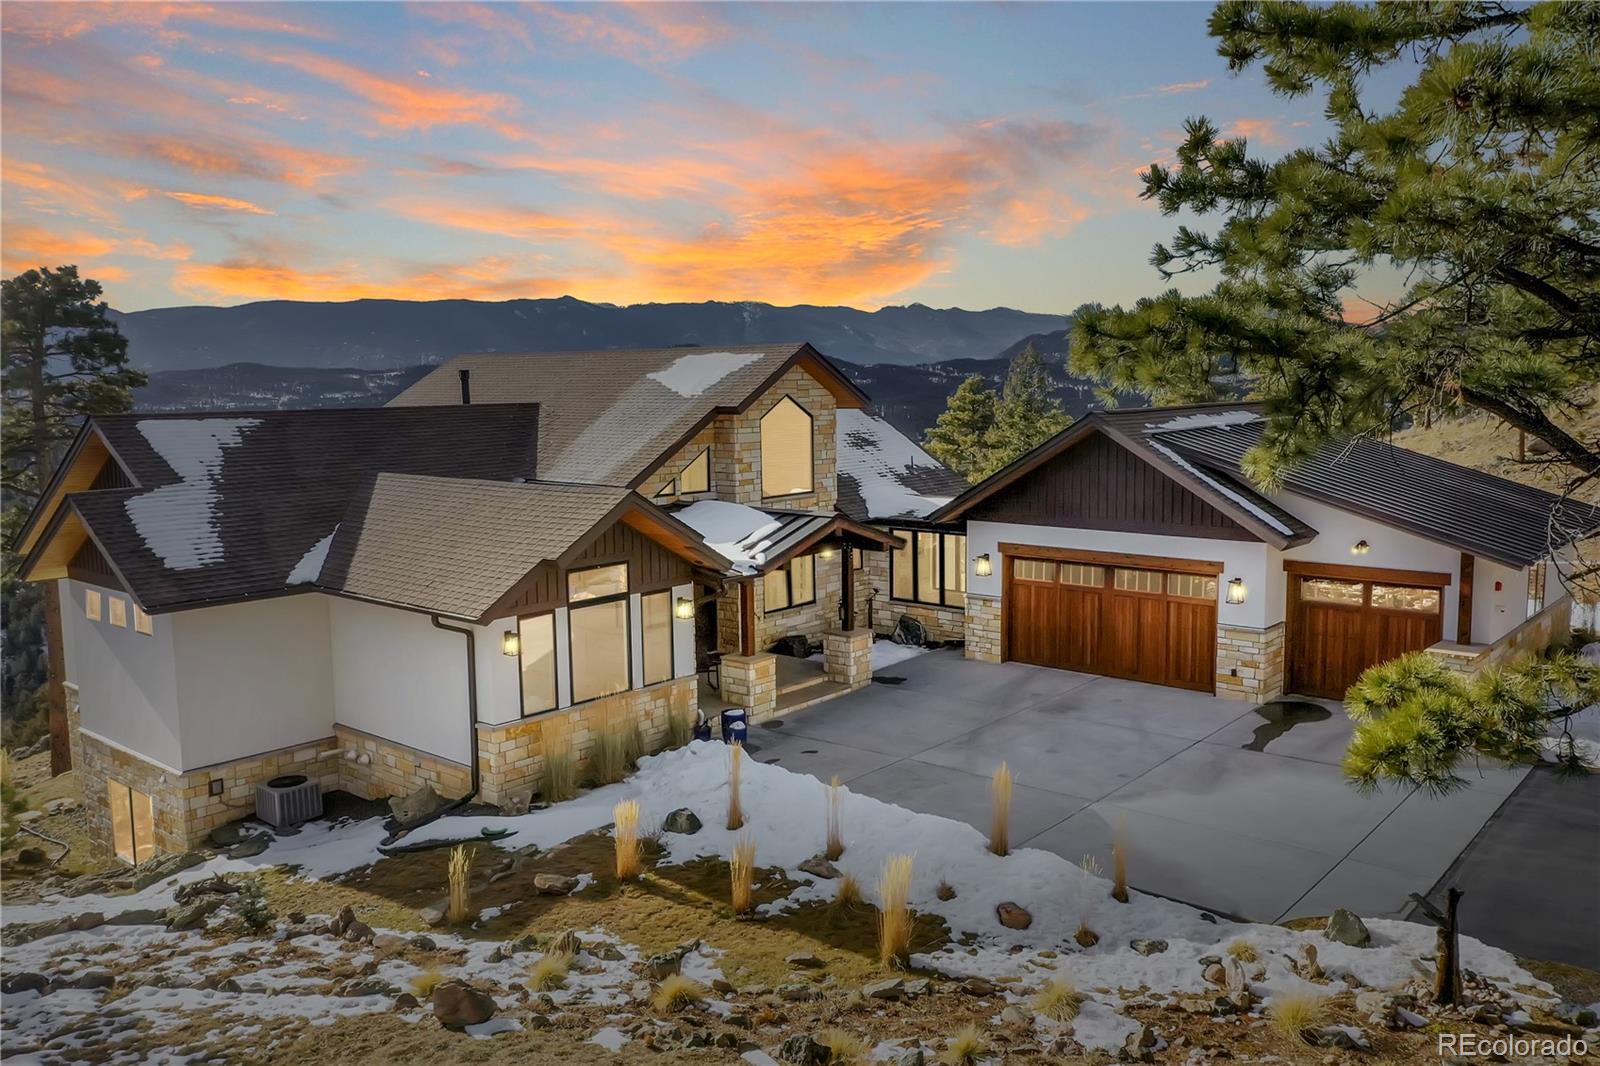 33560  mount wilson trail, Pine sold home. Closed on 2024-02-13 for $1,800,000.